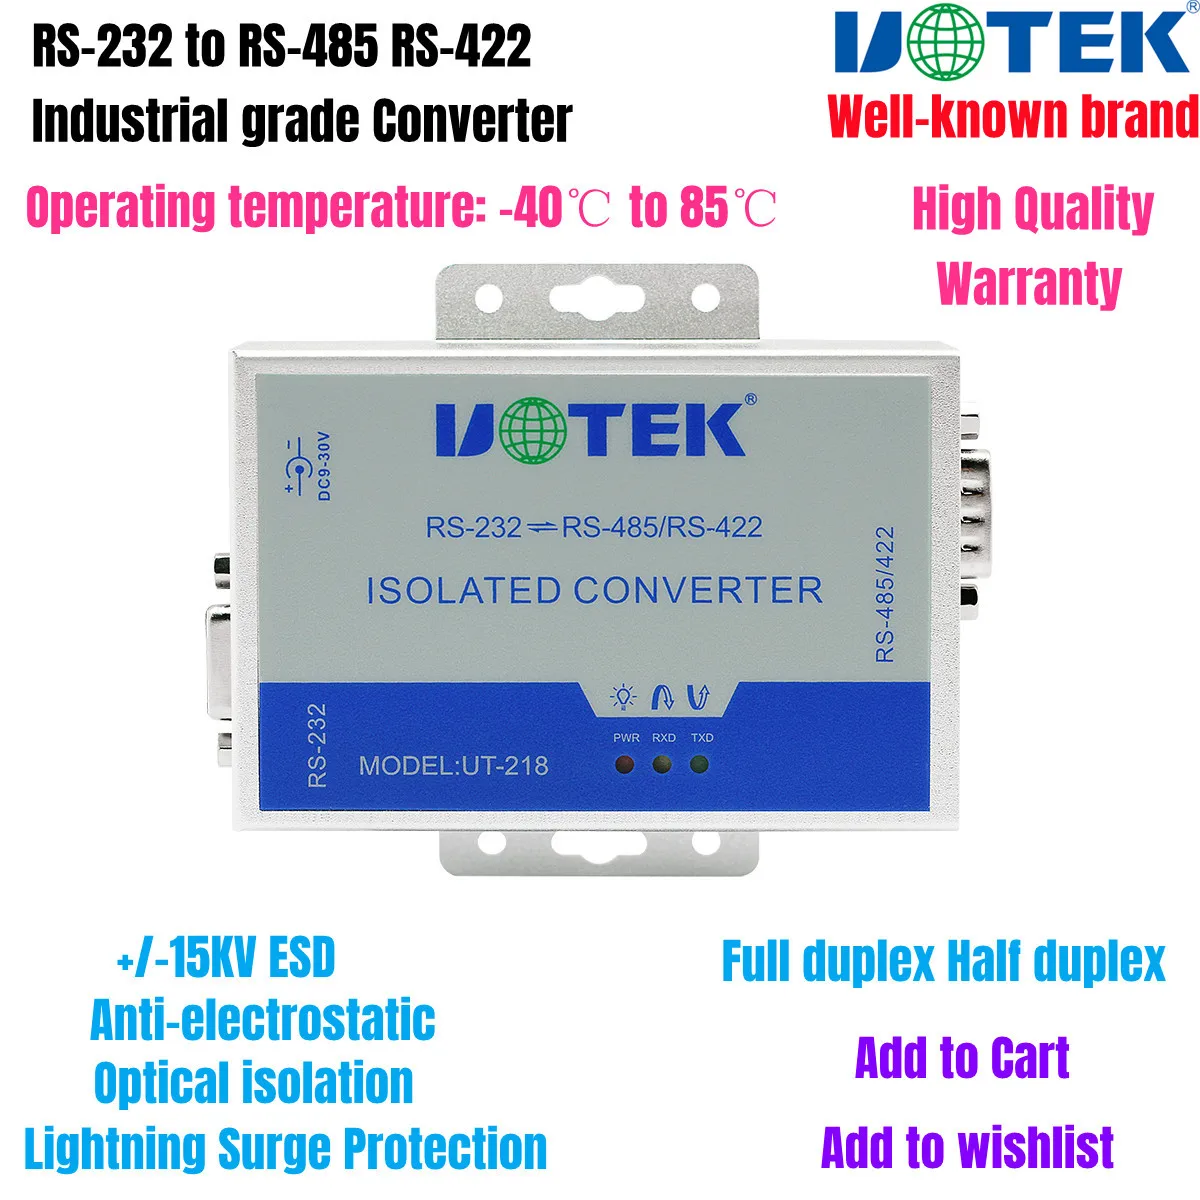 

UOTEK RS-232 to RS-485 RS-422 Converter Serial RS485 RS422 RS232 Adapter DB9 RJ45 Connector Industrial Optical Isolation UT-218